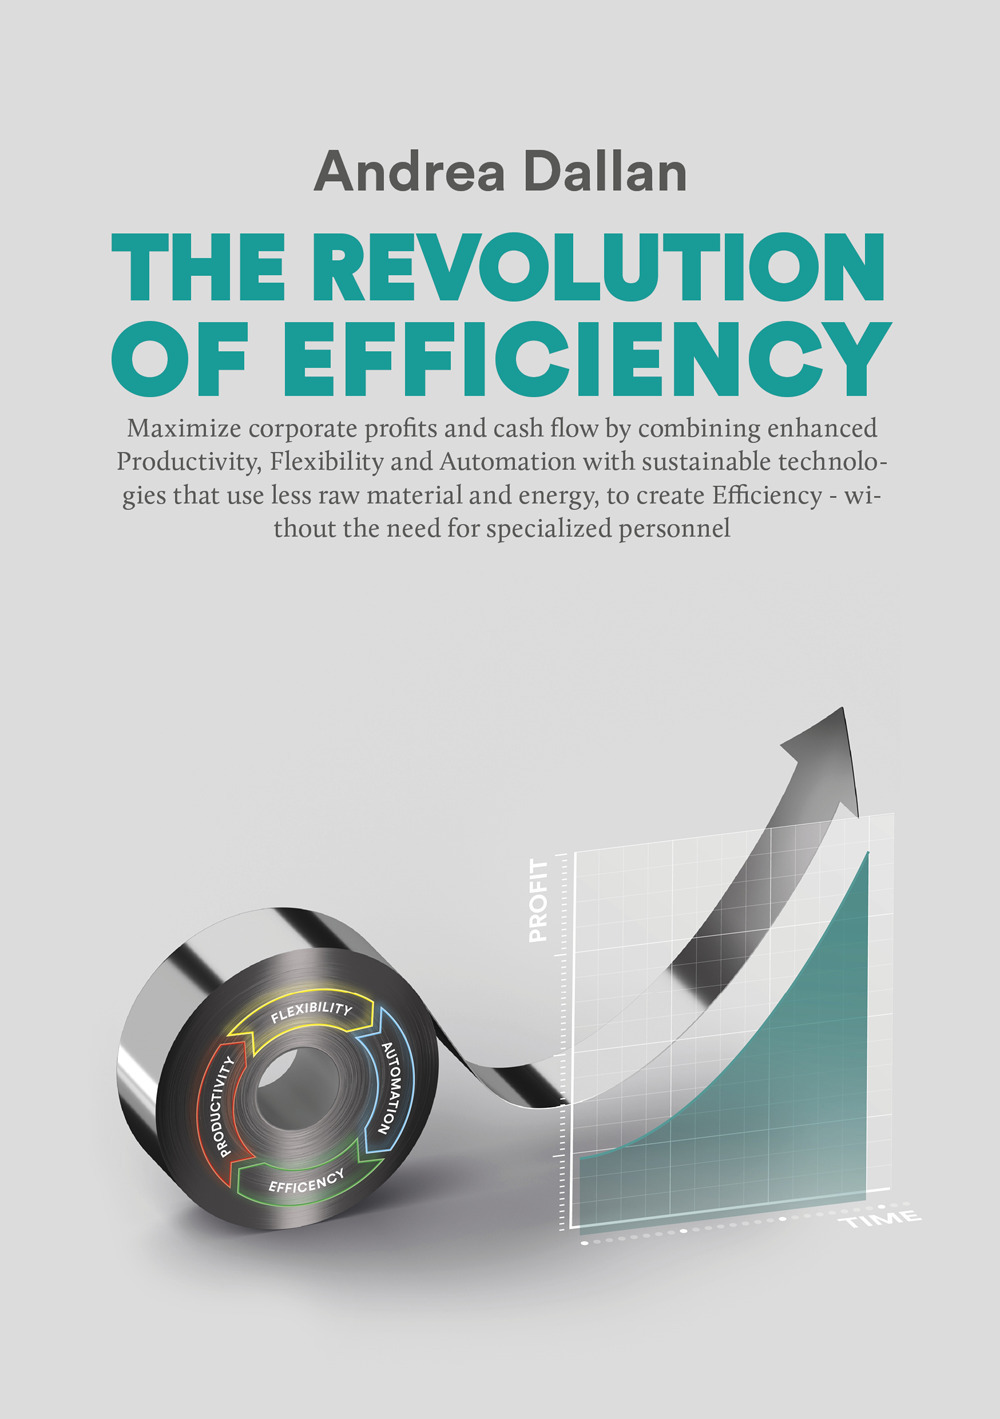 The revolution of efficiency. Maximize corporate profits and cash flow by combining enhanced Productivity, Flexibility and Automation with sustainable technologies that use far less raw material and energy, to create Efficiency - without the need for spec